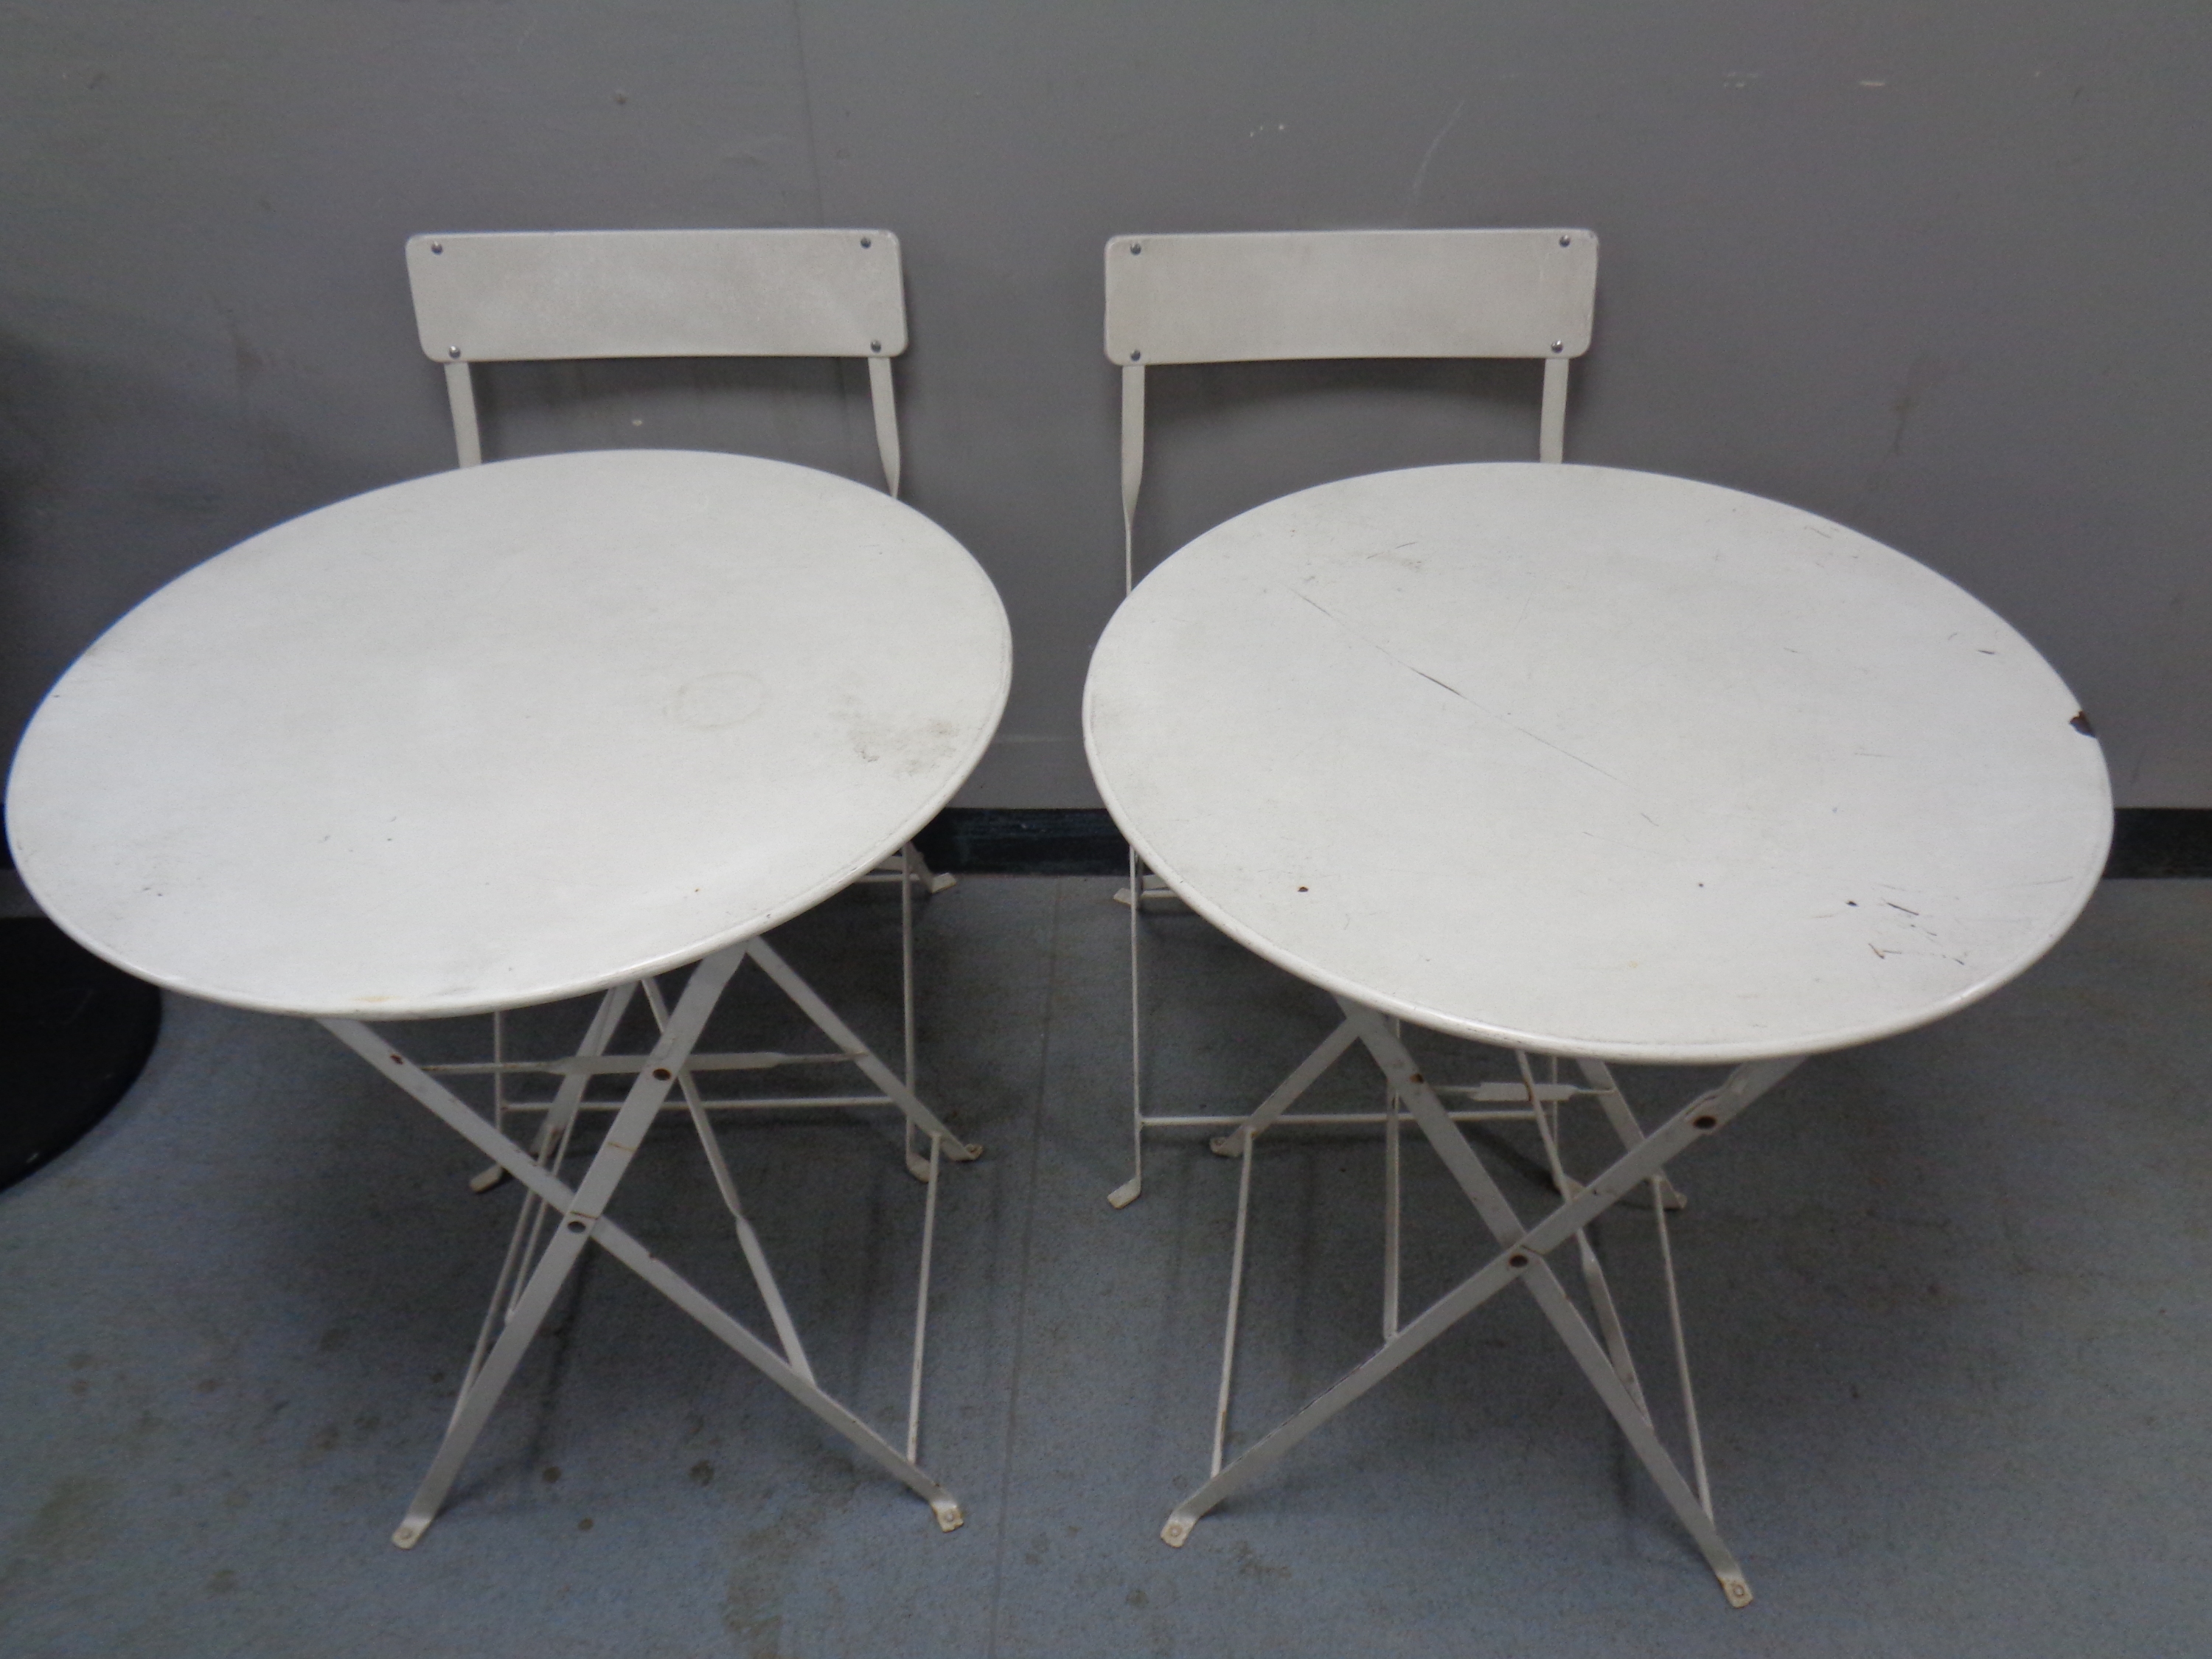 Two circular metal cafe tables and two chairs